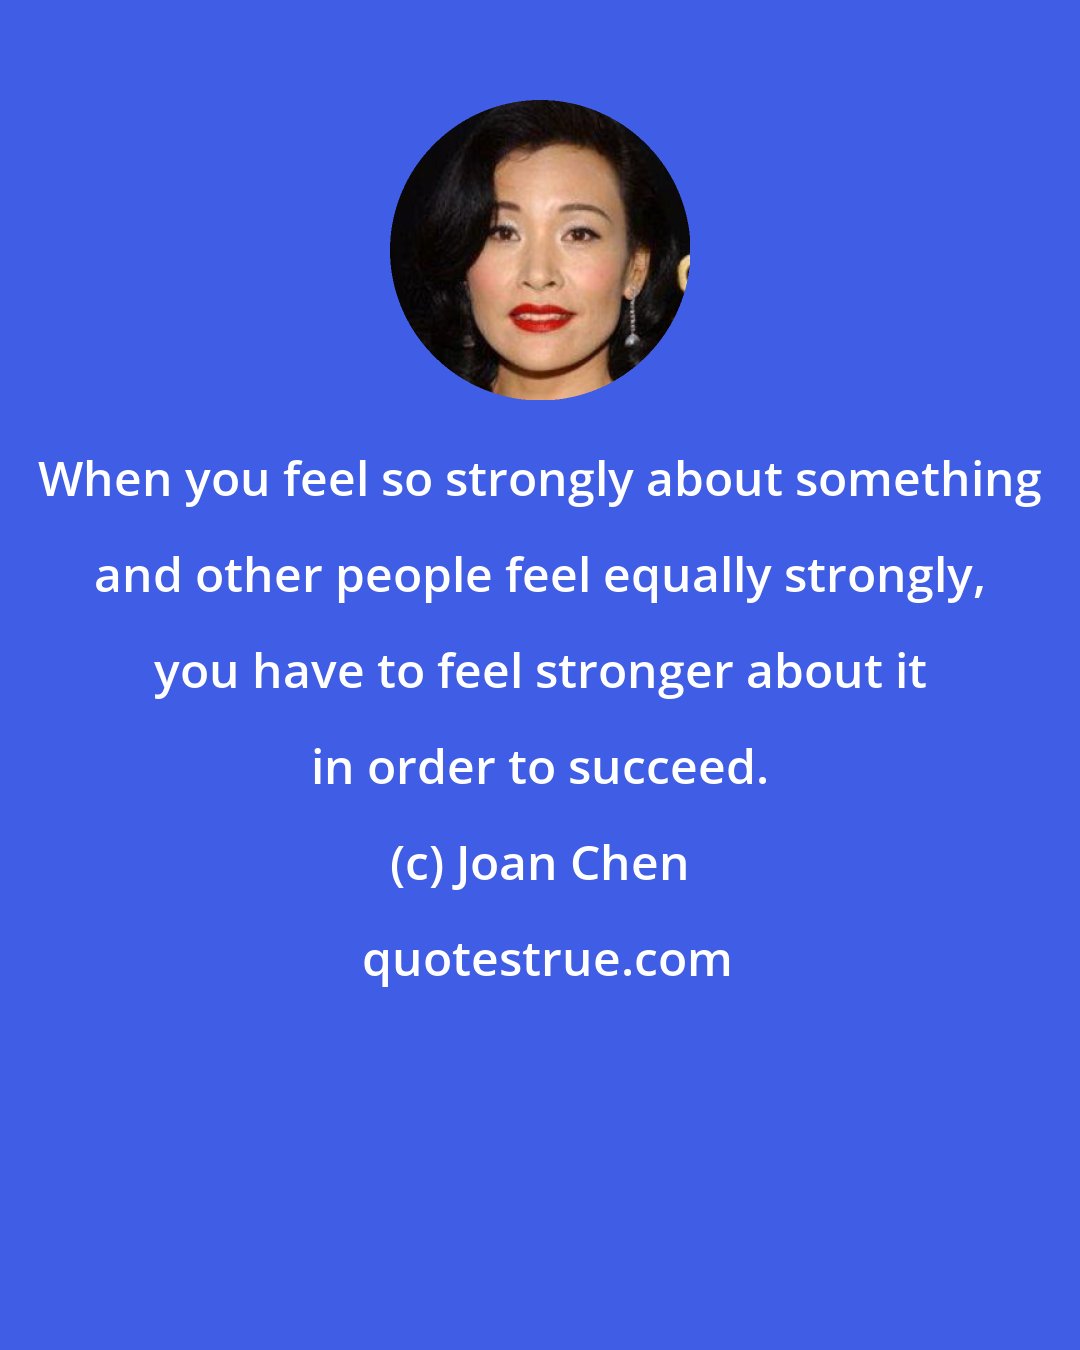 Joan Chen: When you feel so strongly about something and other people feel equally strongly, you have to feel stronger about it in order to succeed.